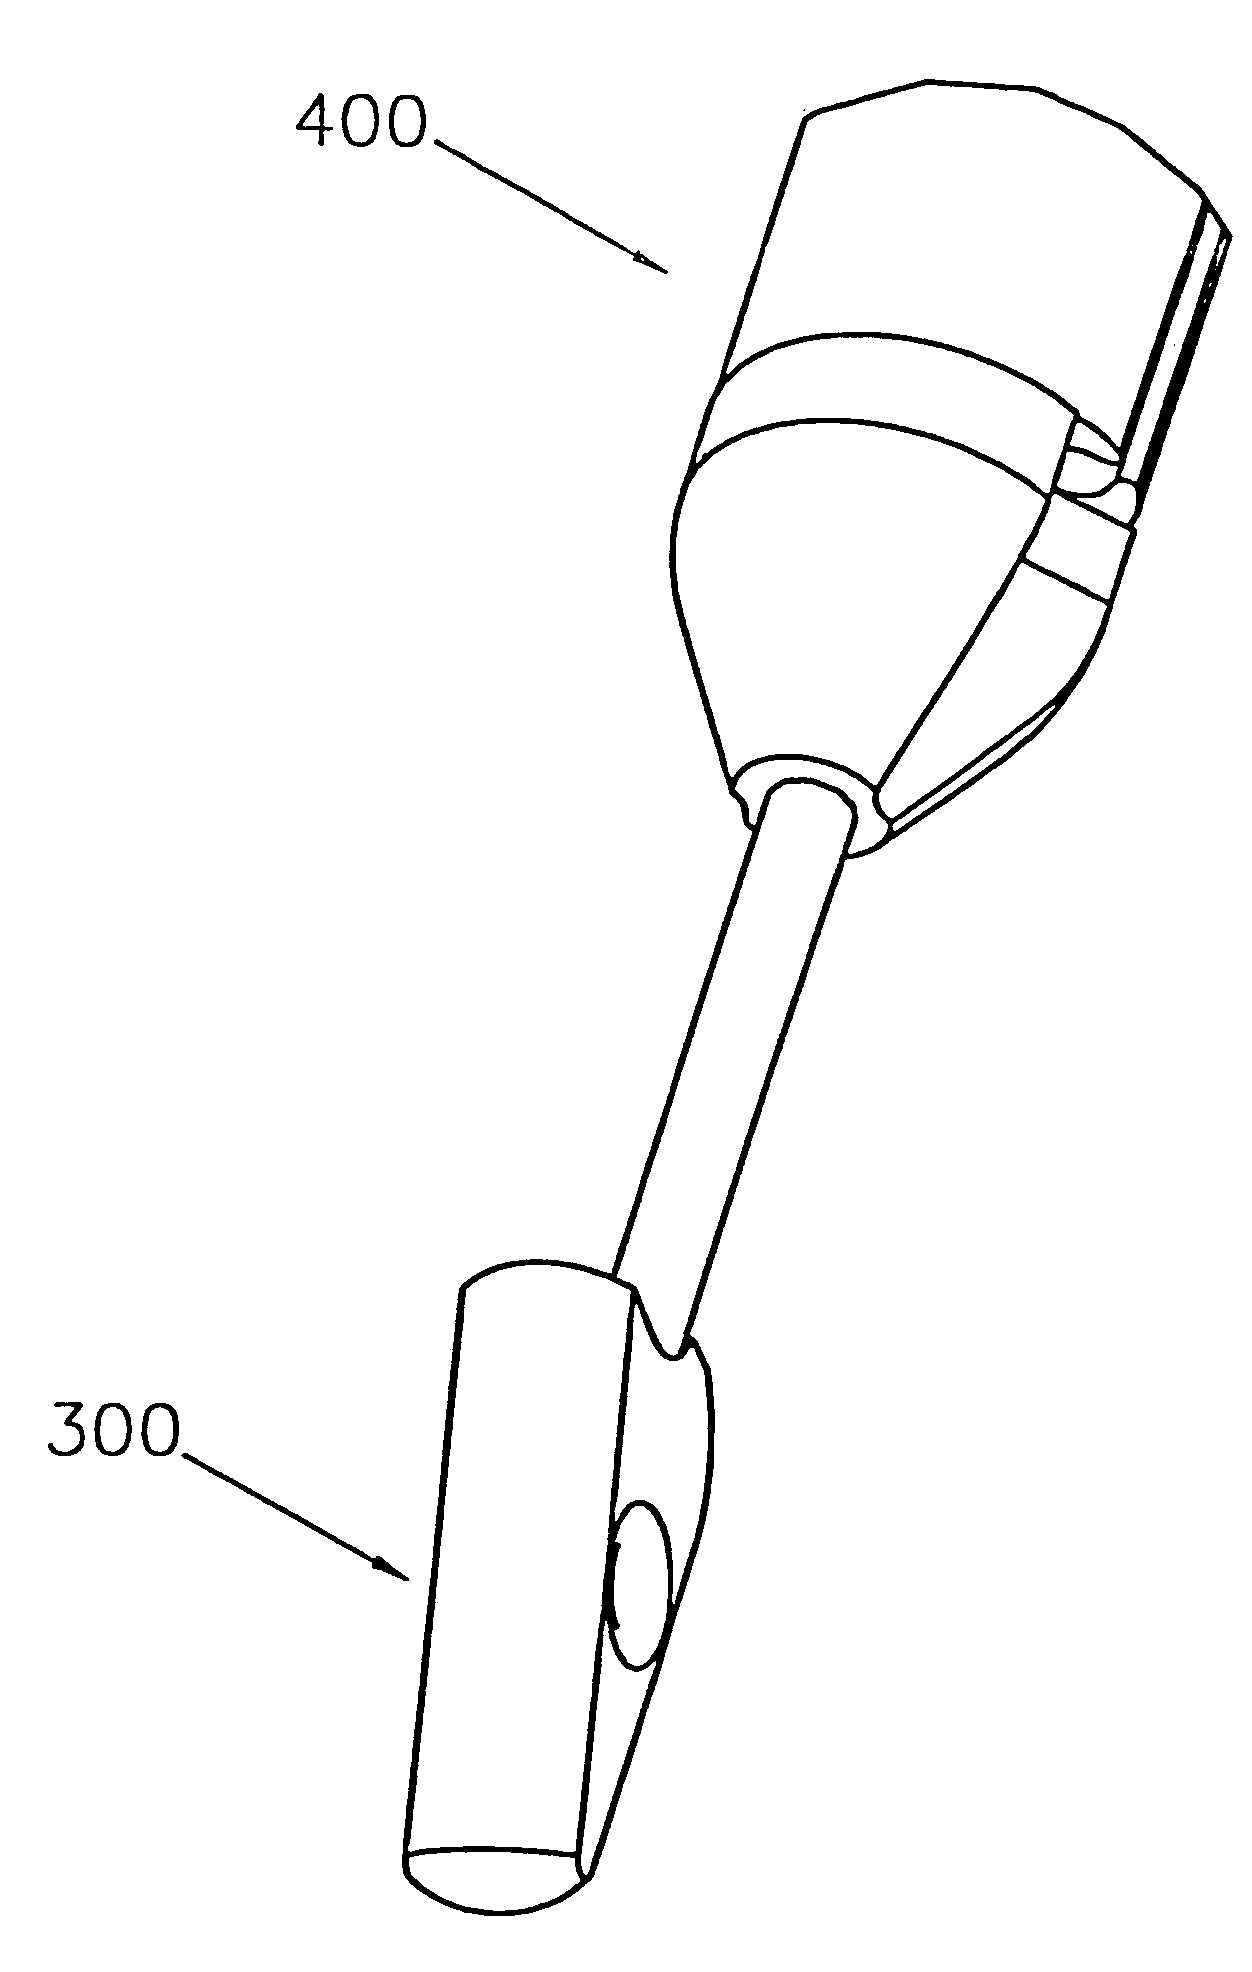 Wedge shaped suture anchor and method of implantation